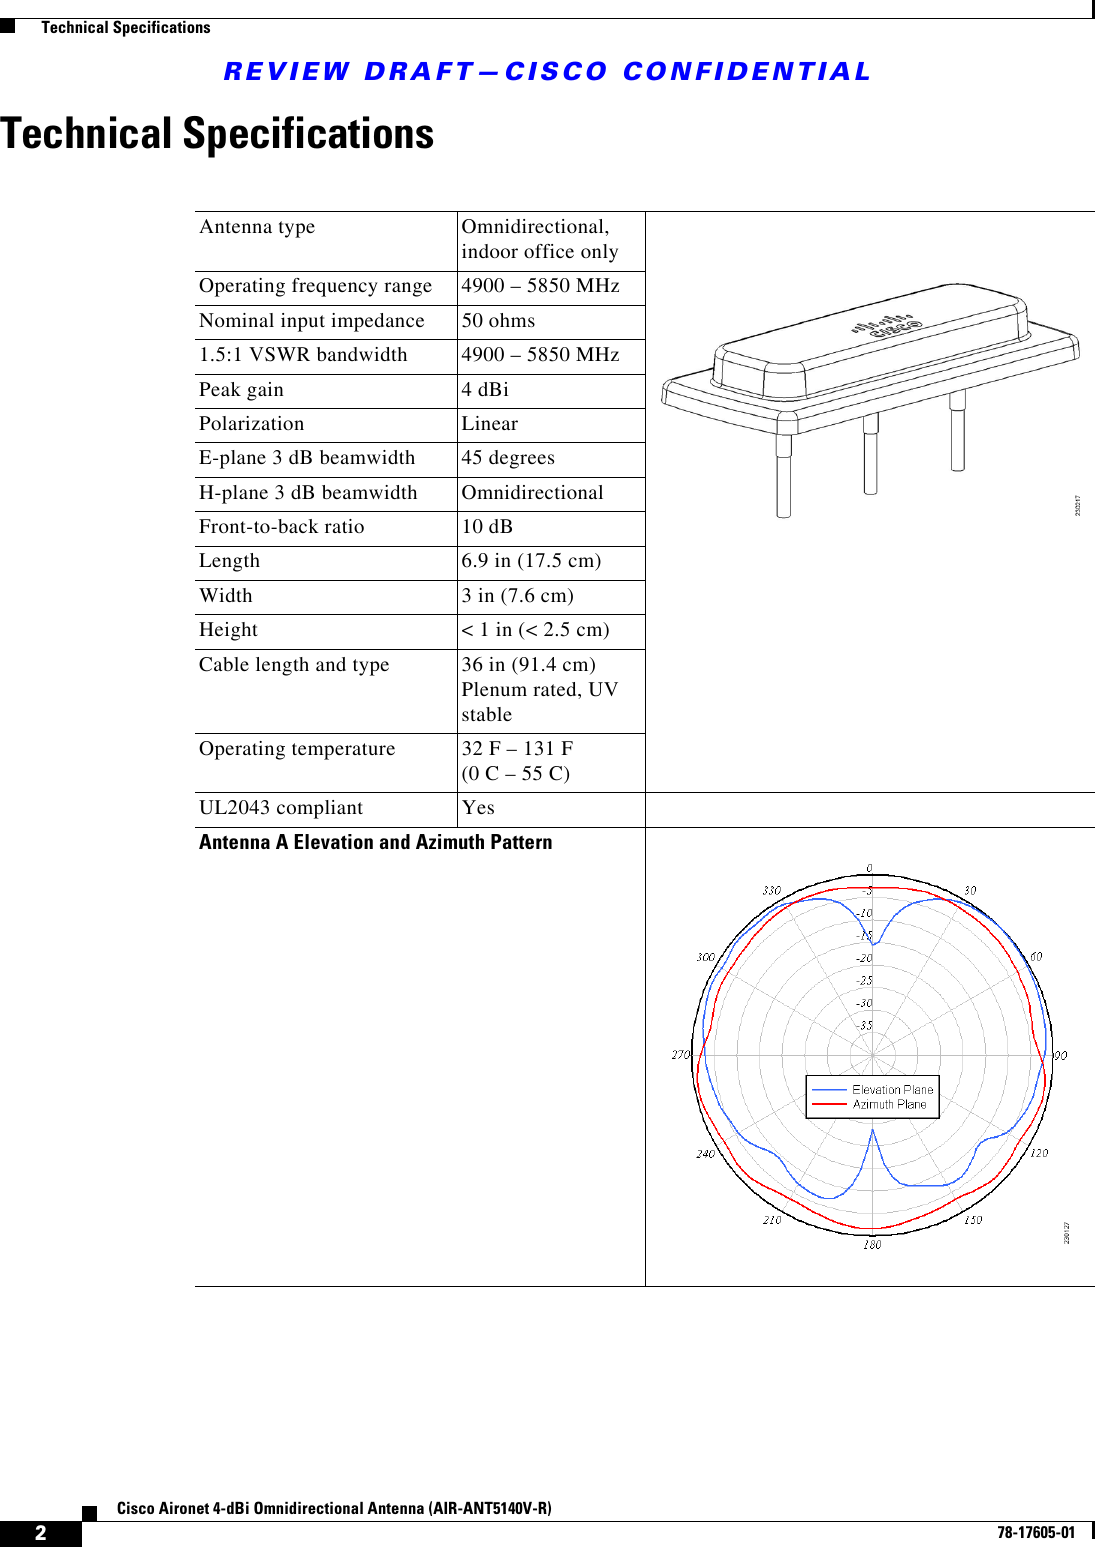 REVIEW DRAFT—CISCO CONFIDENTIAL2Cisco Aironet 4-dBi Omnidirectional Antenna (AIR-ANT5140V-R)78-17605-01  Technical SpecificationsTechnical SpecificationsAntenna type Omnidirectional, indoor office onlyOperating frequency range 4900 – 5850 MHzNominal input impedance 50 ohms1.5:1 VSWR bandwidth 4900 – 5850 MHzPeak gain 4 dBiPolarization LinearE-plane 3 dB beamwidth 45 degreesH-plane 3 dB beamwidth OmnidirectionalFront-to-back ratio 10 dBLength 6.9 in (17.5 cm)Width 3 in (7.6 cm)Height &lt; 1 in (&lt; 2.5 cm)Cable length and type 36 in (91.4 cm) Plenum rated, UV stableOperating temperature 32 F – 131 F(0 C – 55 C)UL2043 compliant YesAntenna A Elevation and Azimuth Pattern